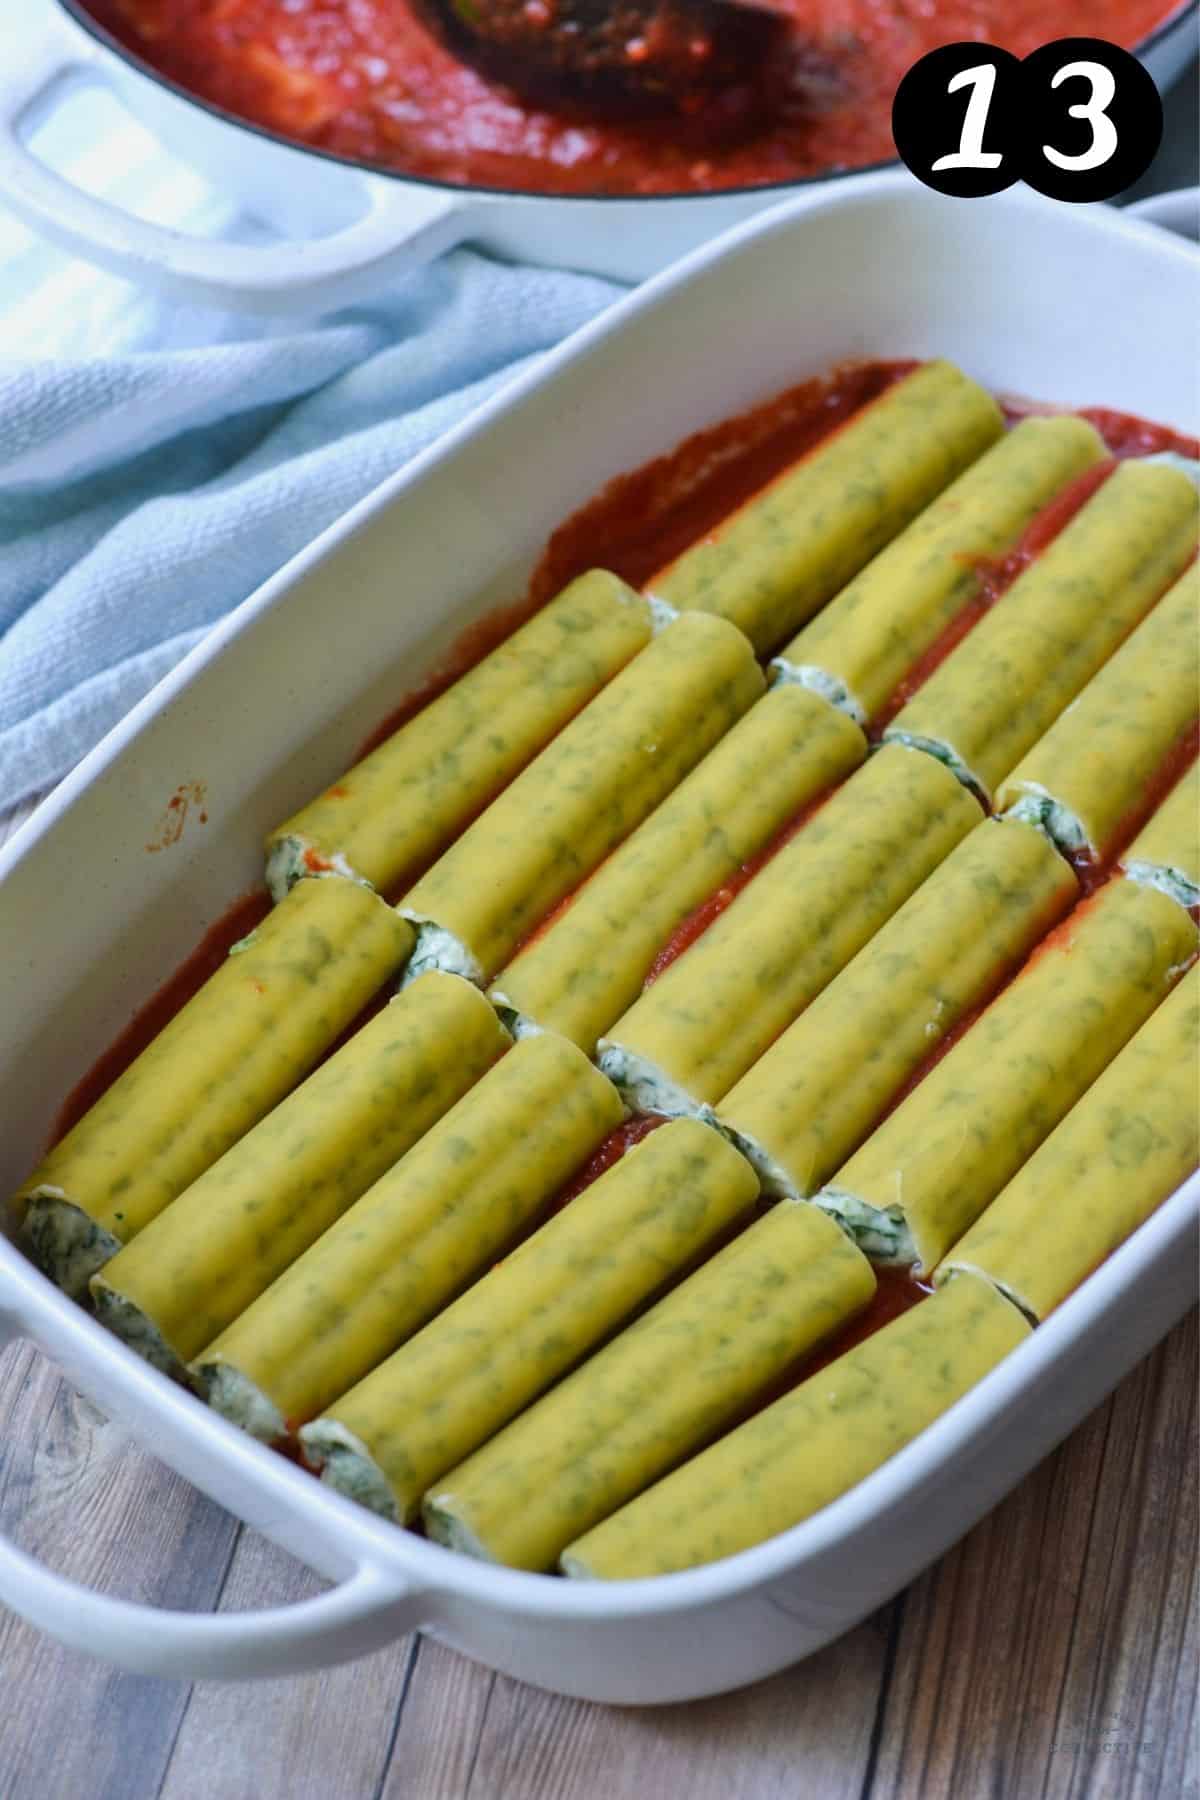 cannelloni tubes arranged over tomato sauce in a baking dish